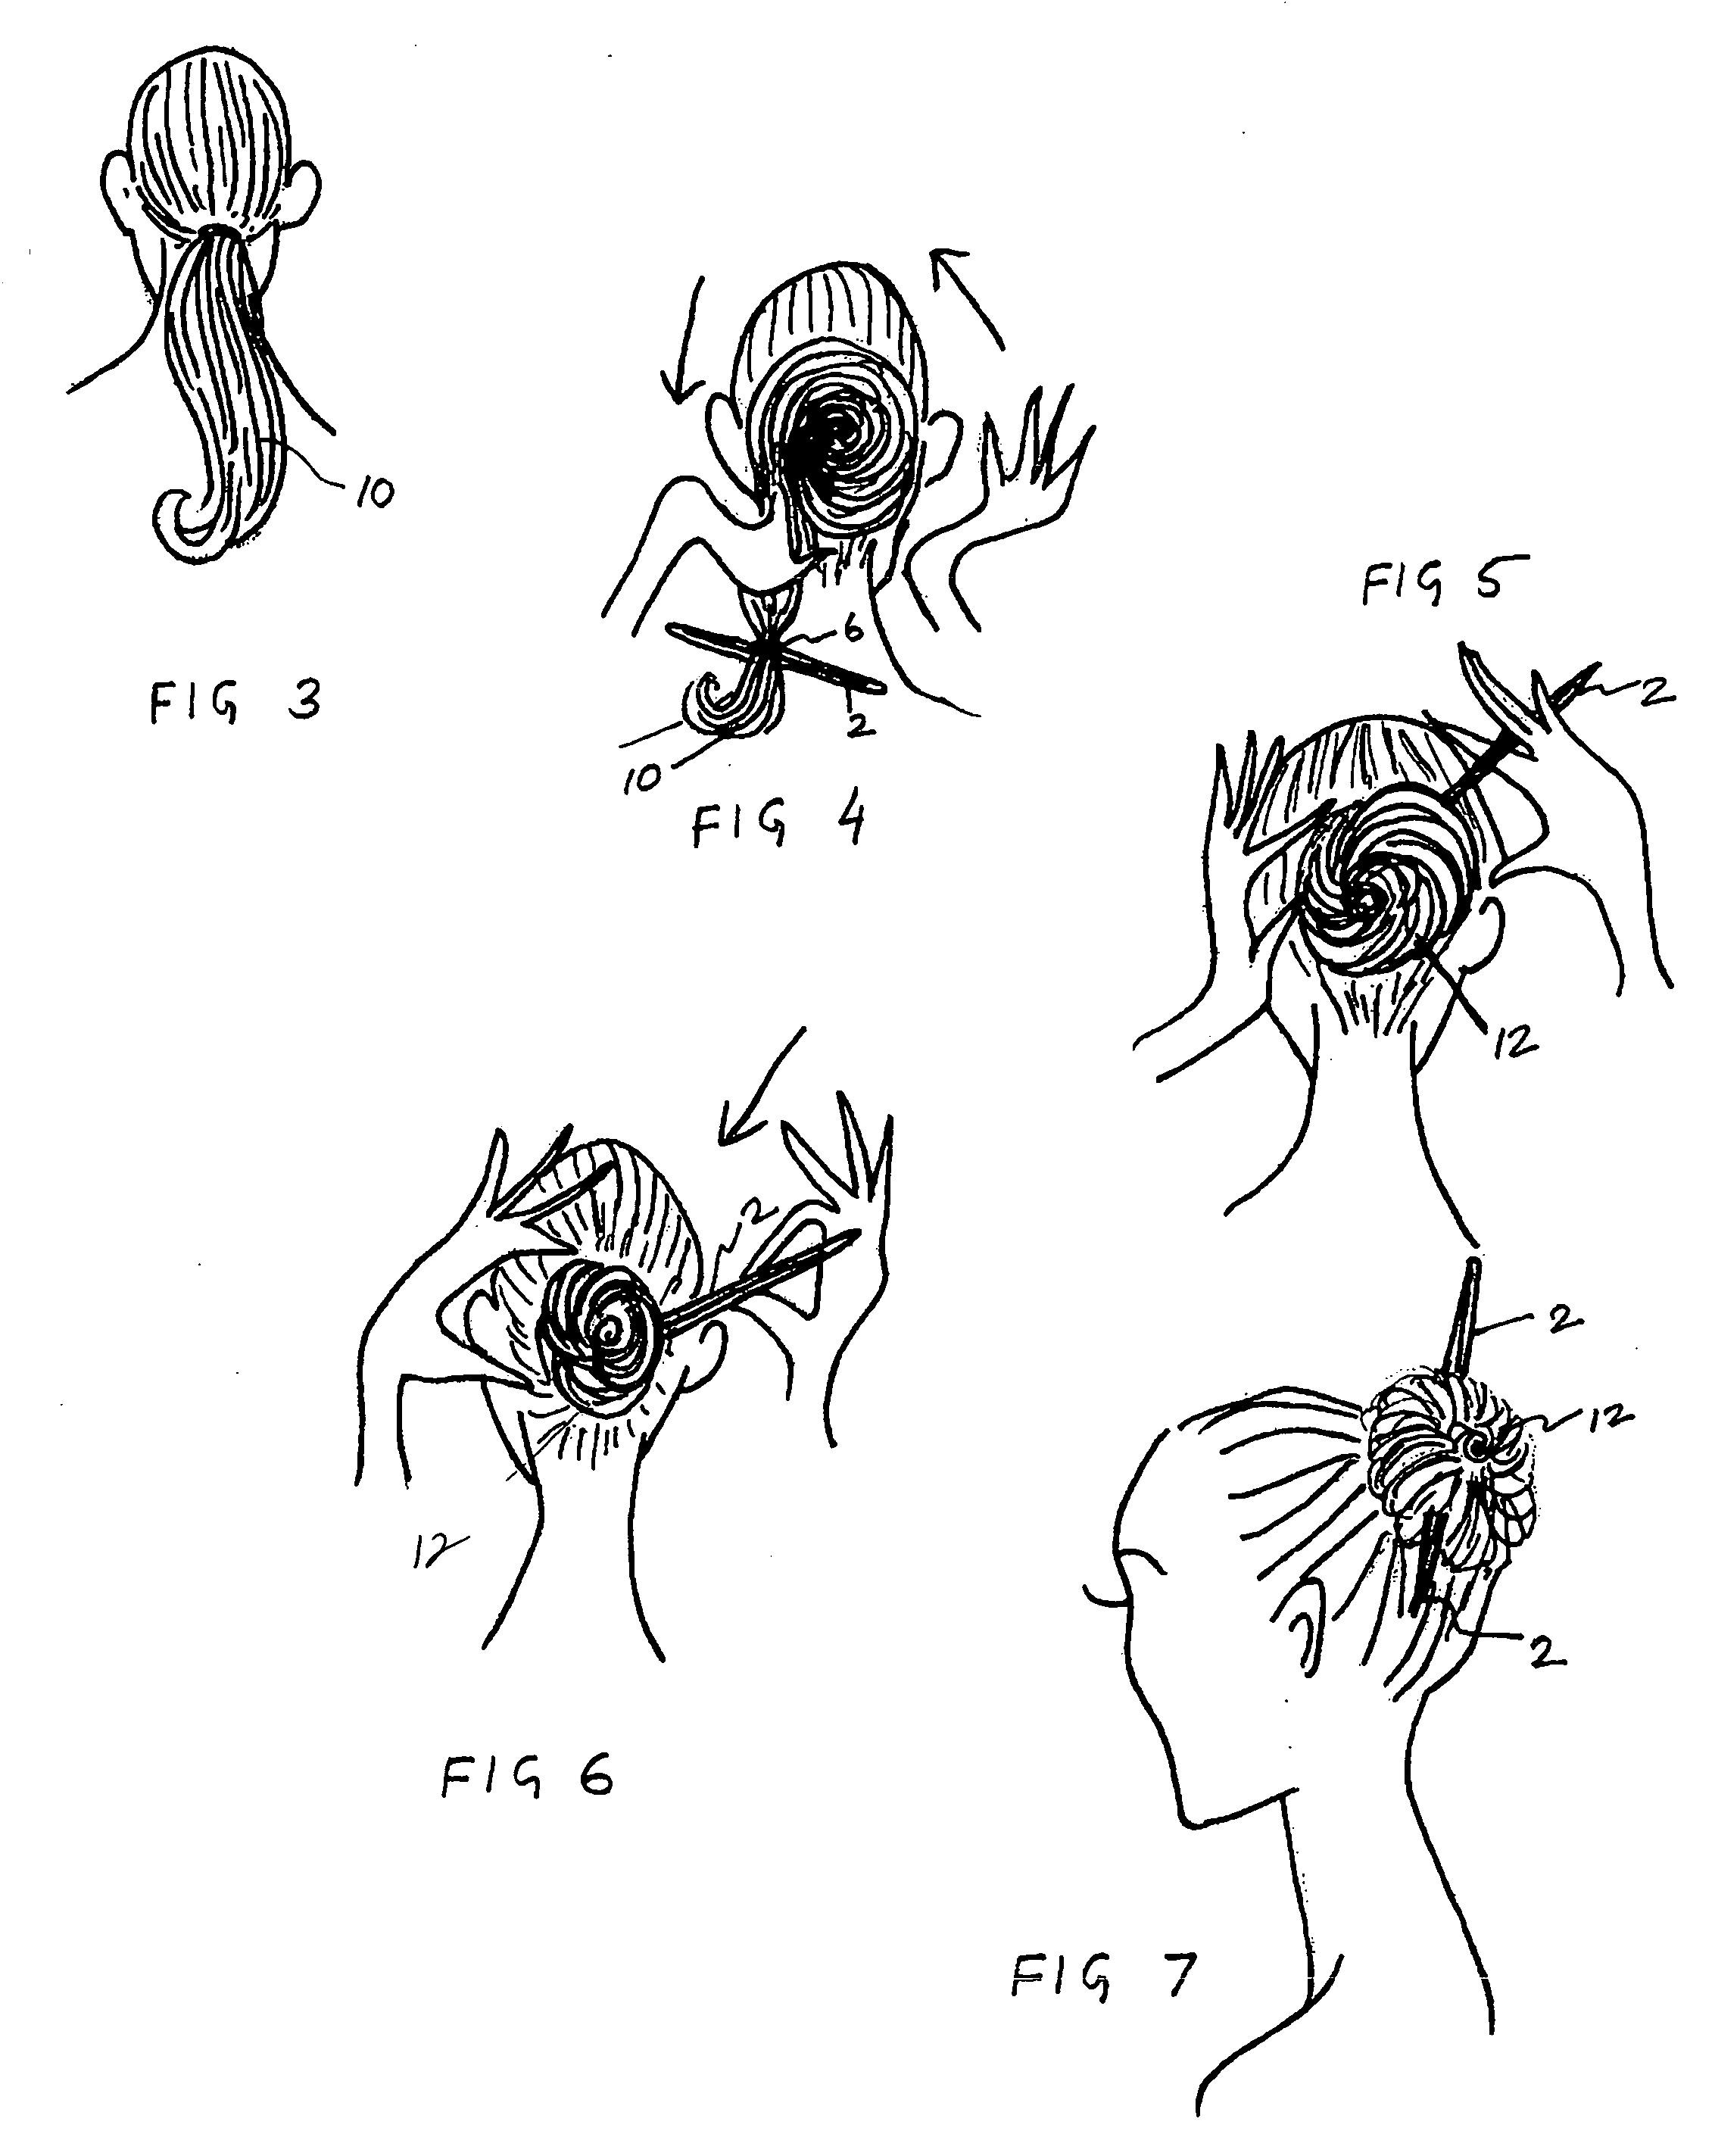 Hair styling apparatus and method of using same